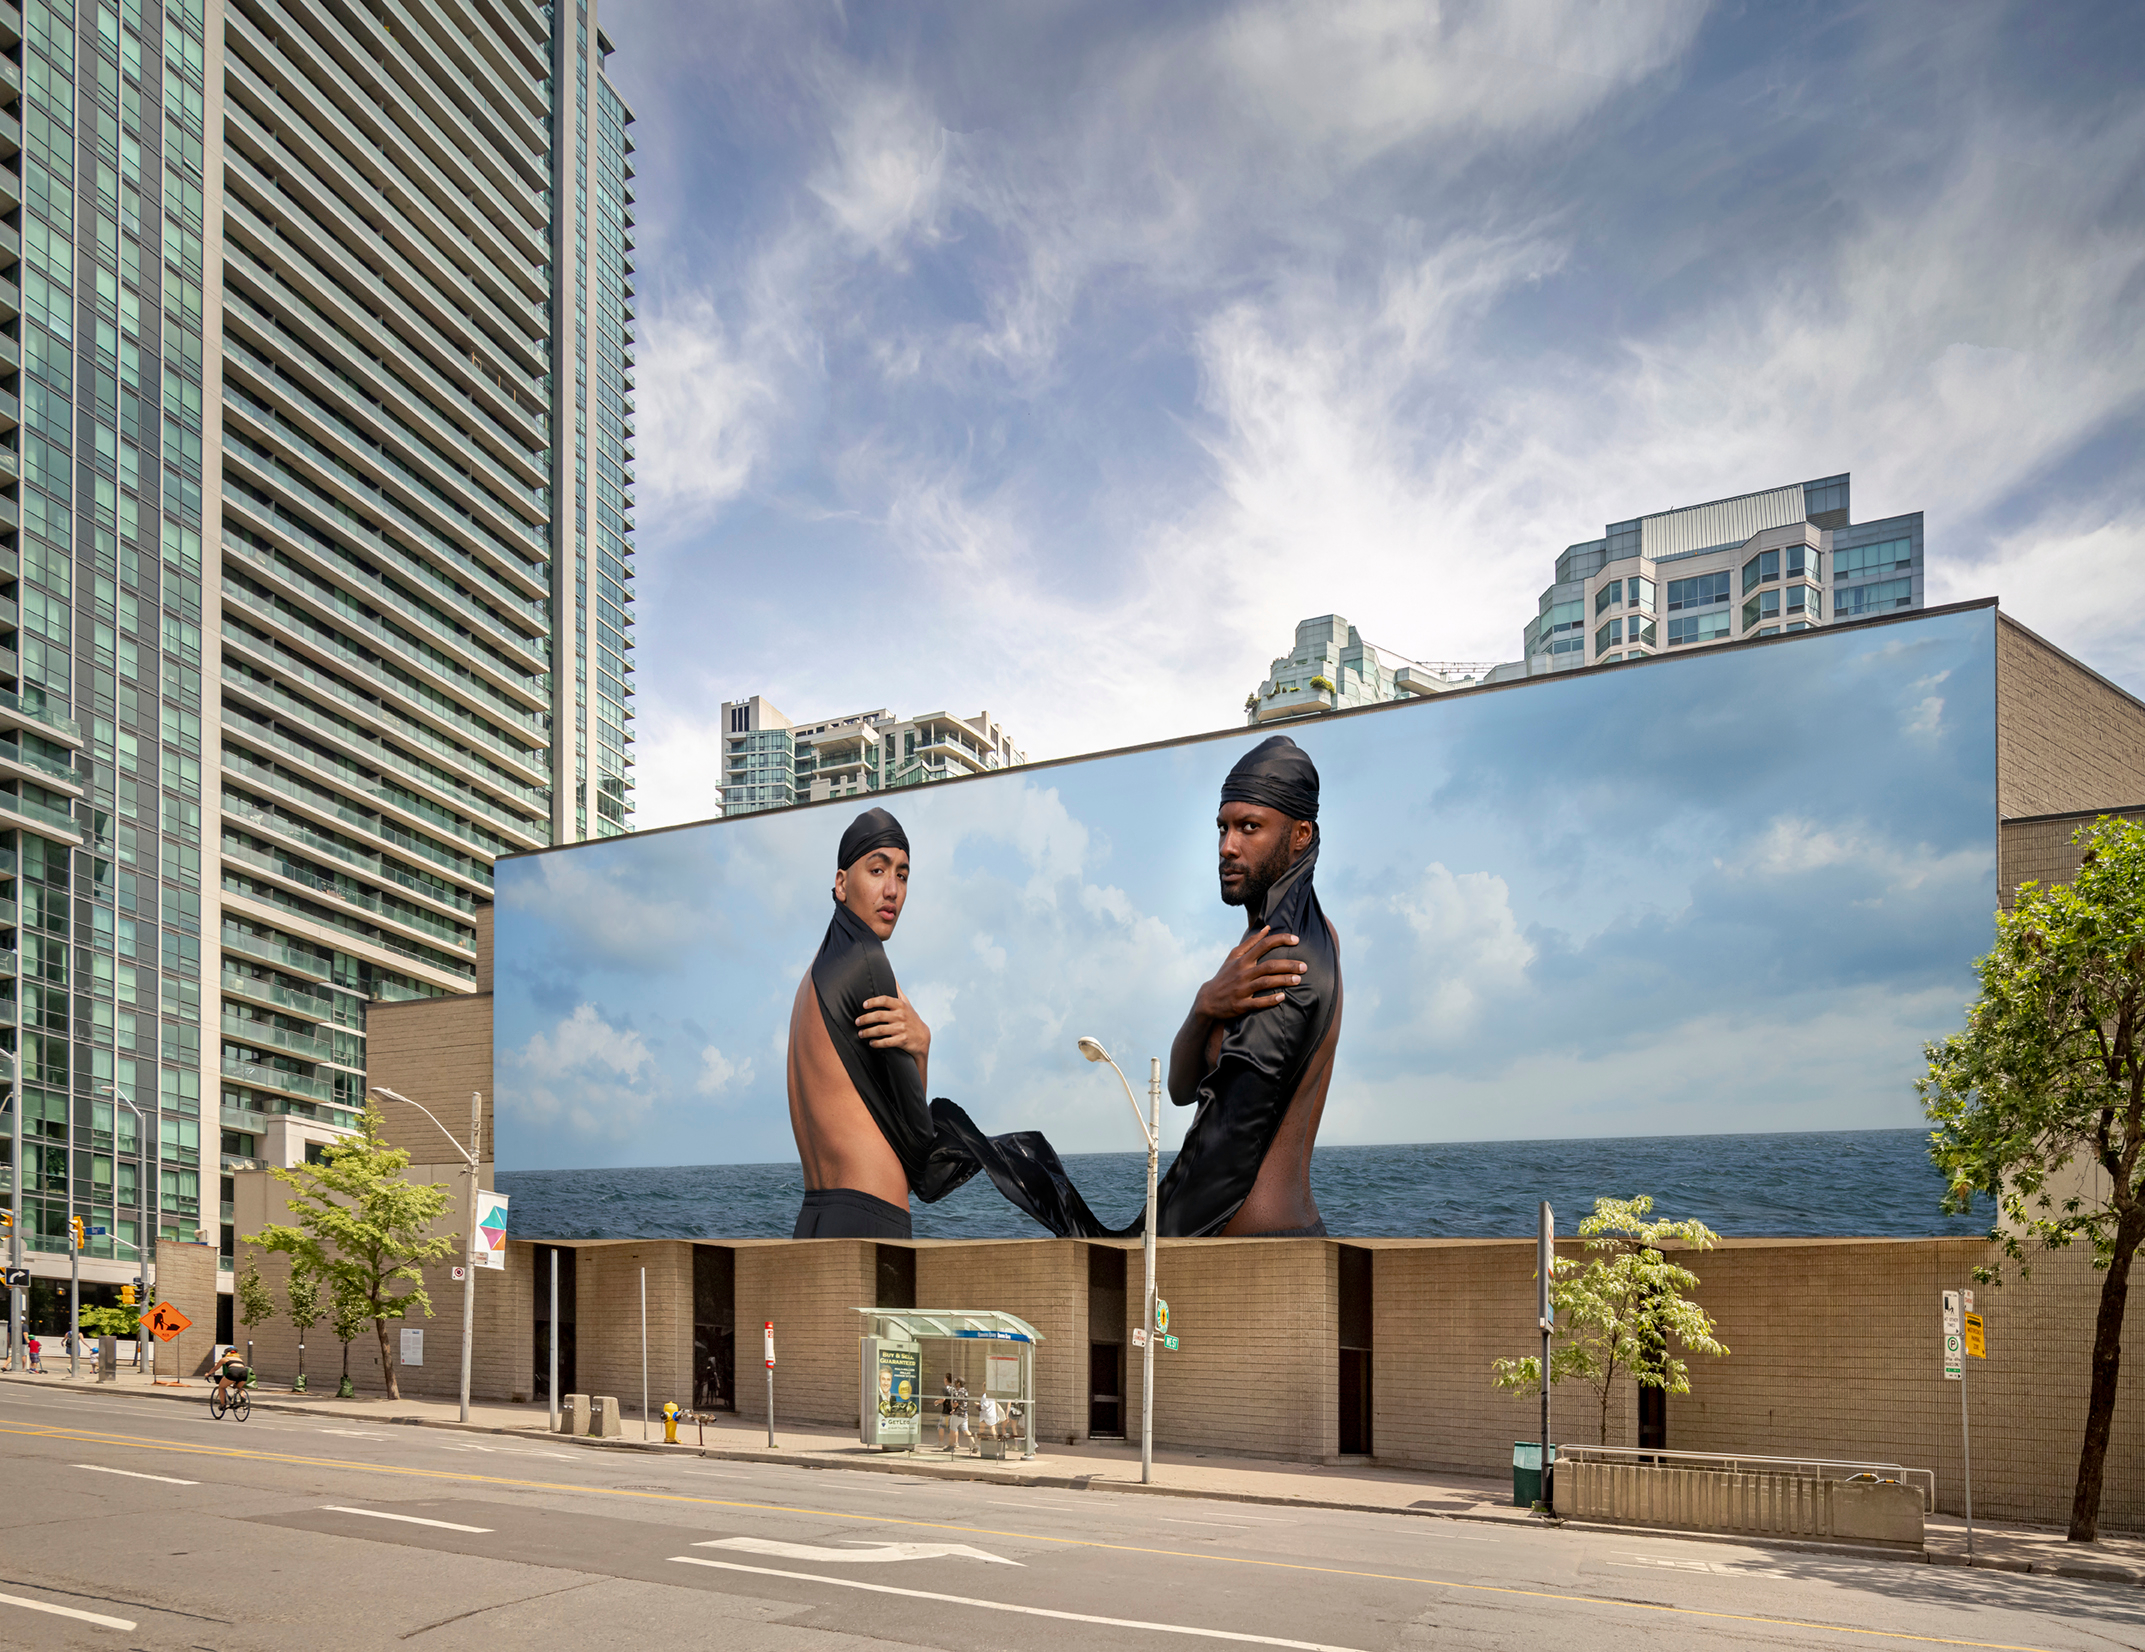     Esmaa Mohamoud, The Brotherhood FUBU (For Us, By Us), installation at Westin Harbour Castle Conference Centre, Toronto 2021. Courtesy of the artist, Georgia Scherman Projects and CONTACT. Photo: Toni Hafkenscheid

